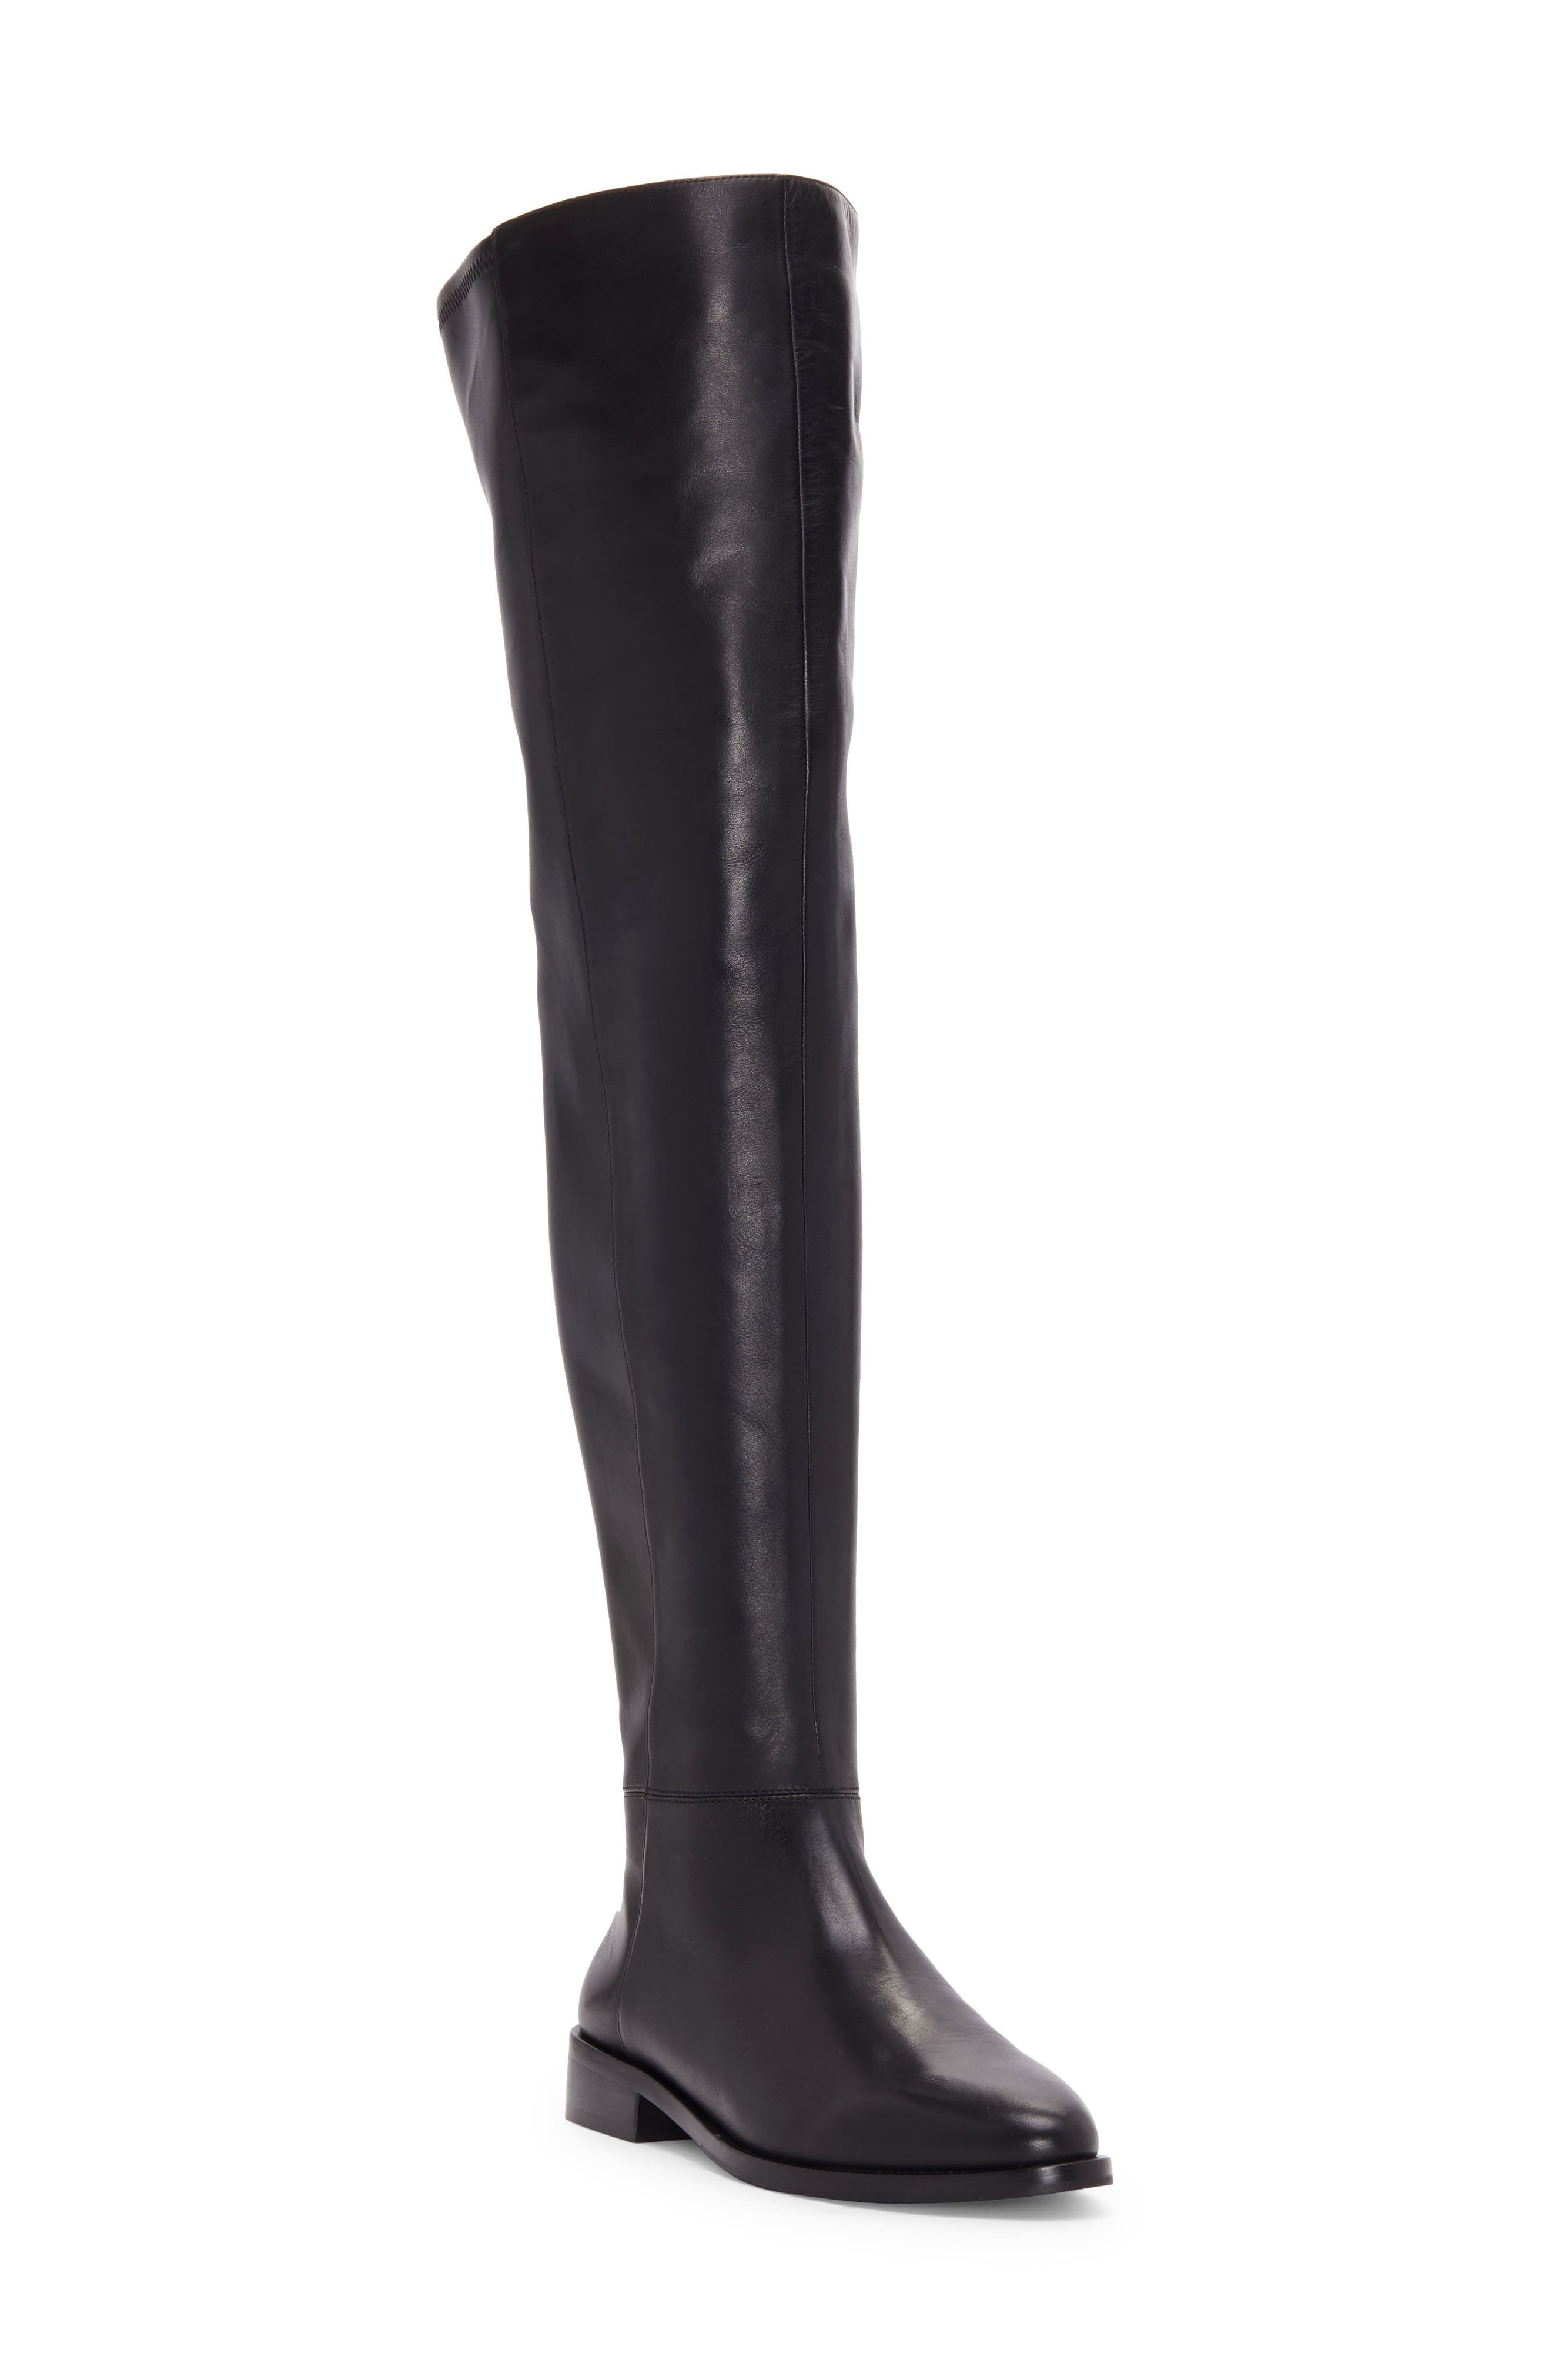 Vince Camuto Hailie Over the Knee Boot 